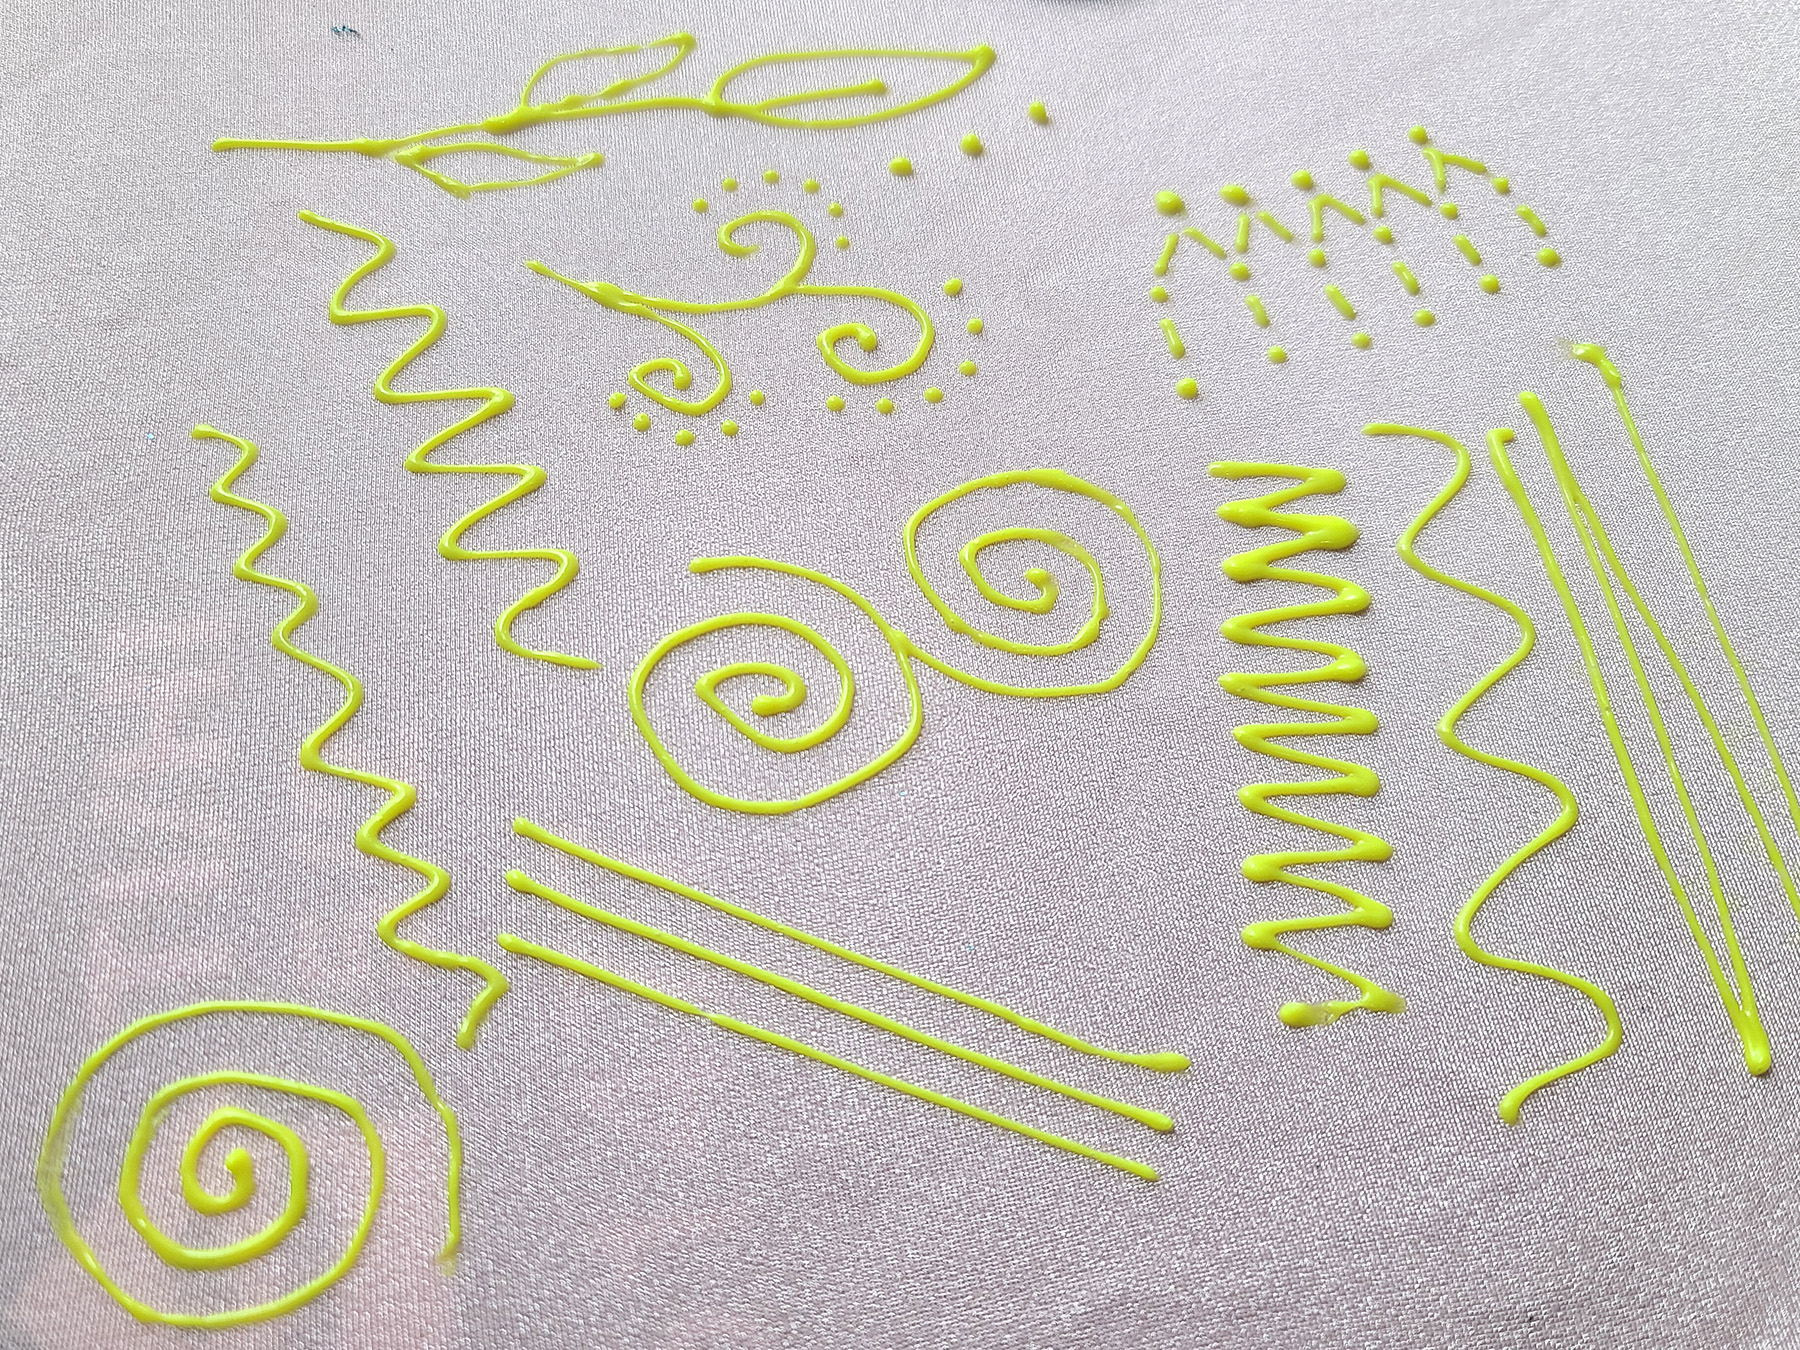 Neon yellow stretch fabric paint designs on a light pink spandex background.